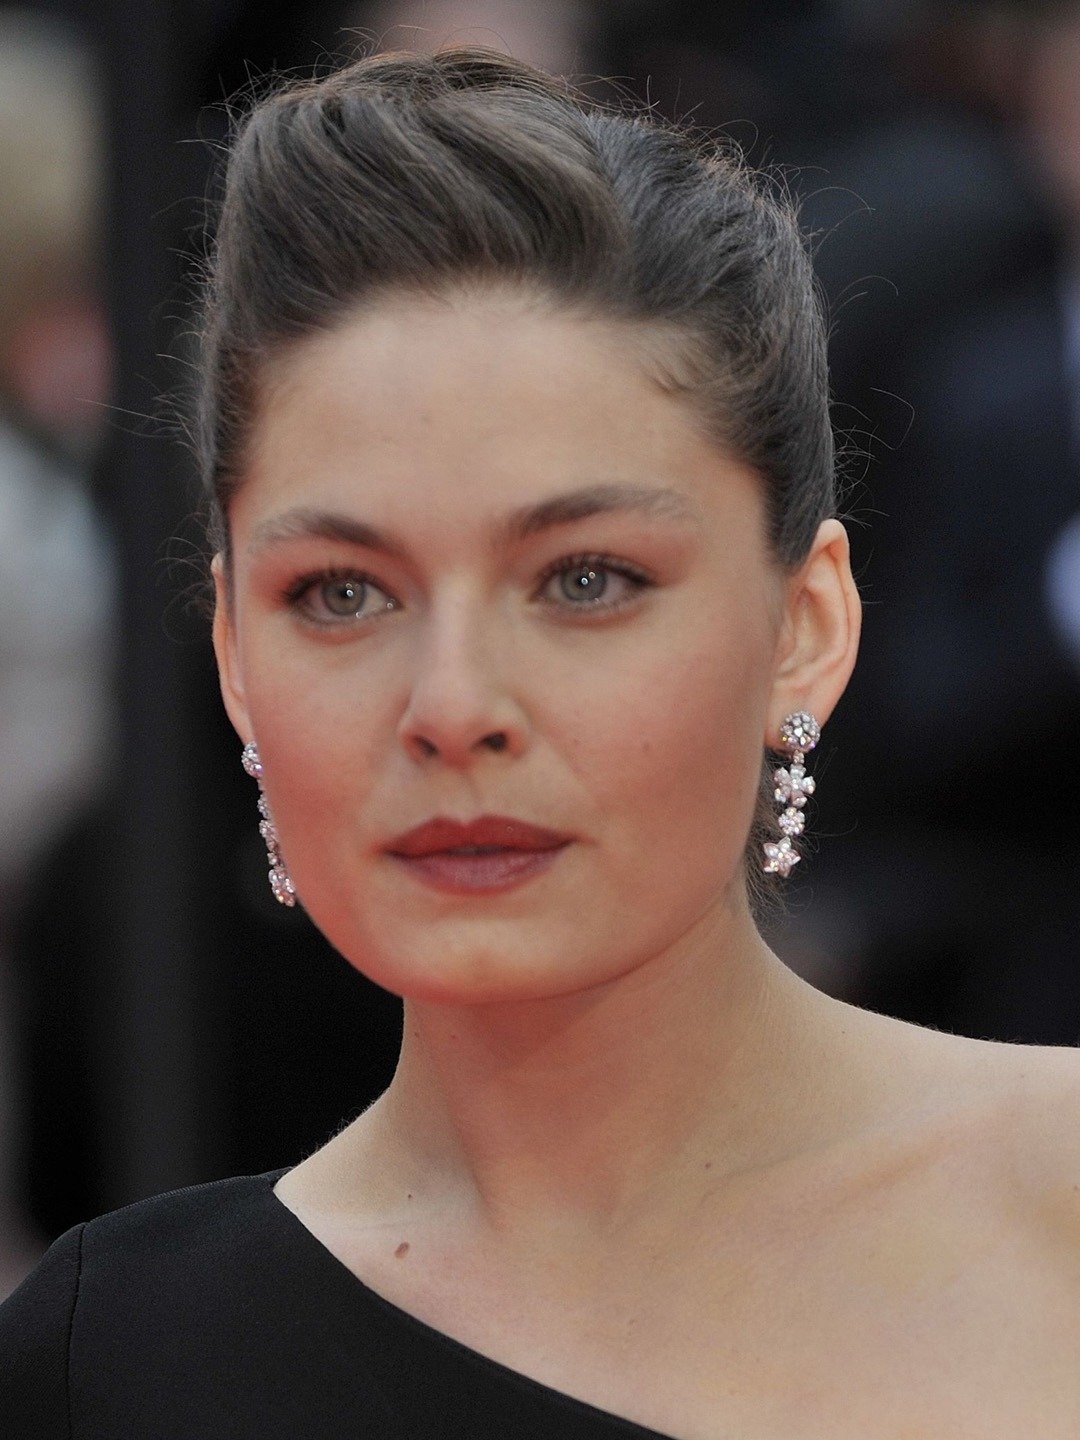 donald whitley recommends alexa davalos hot pics pic